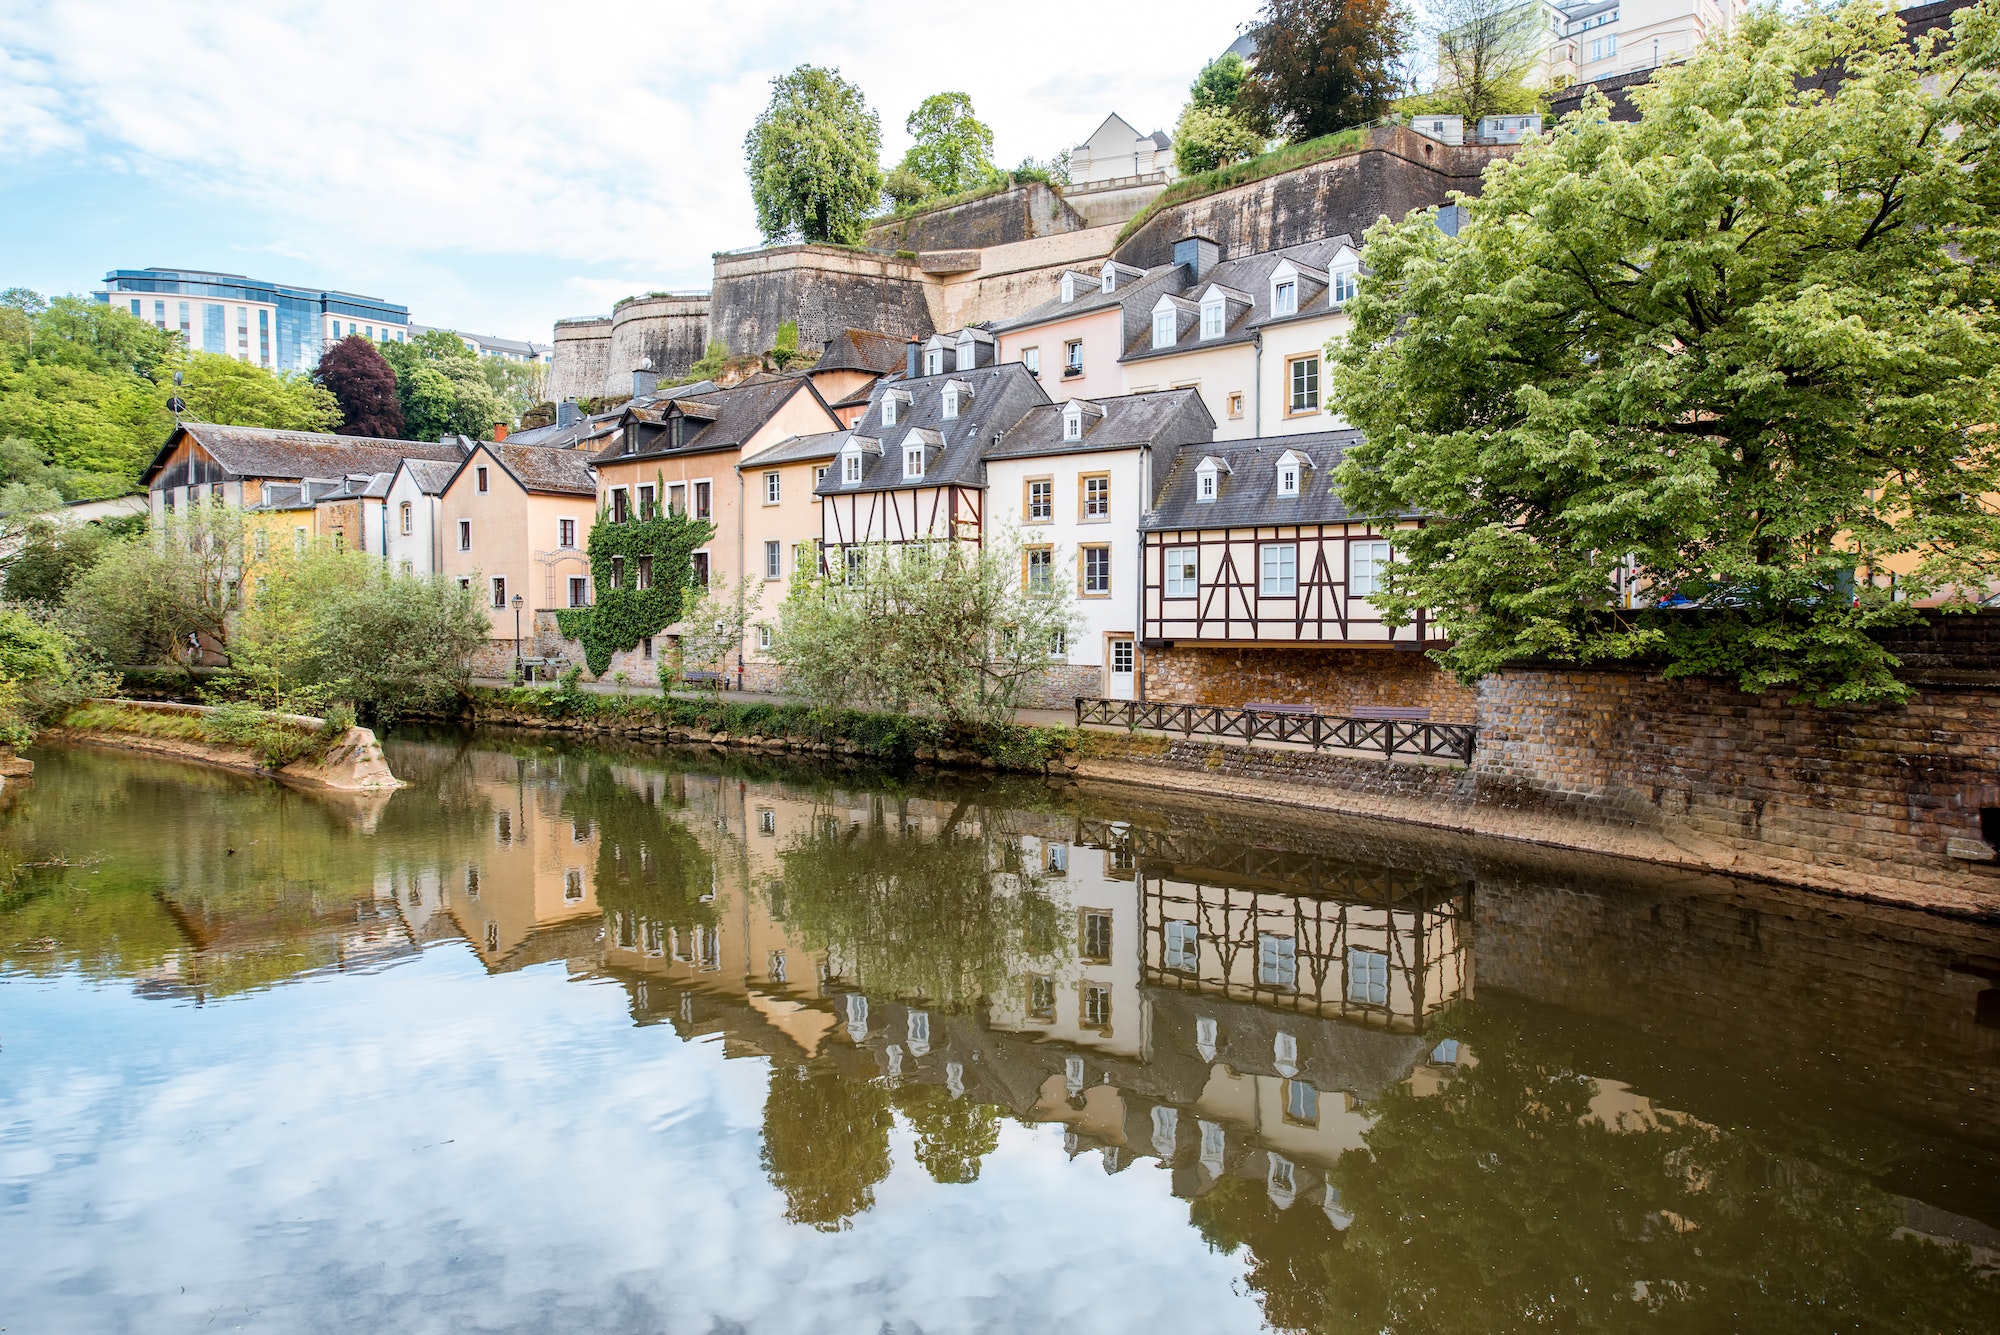 The old town of Luxembourg city